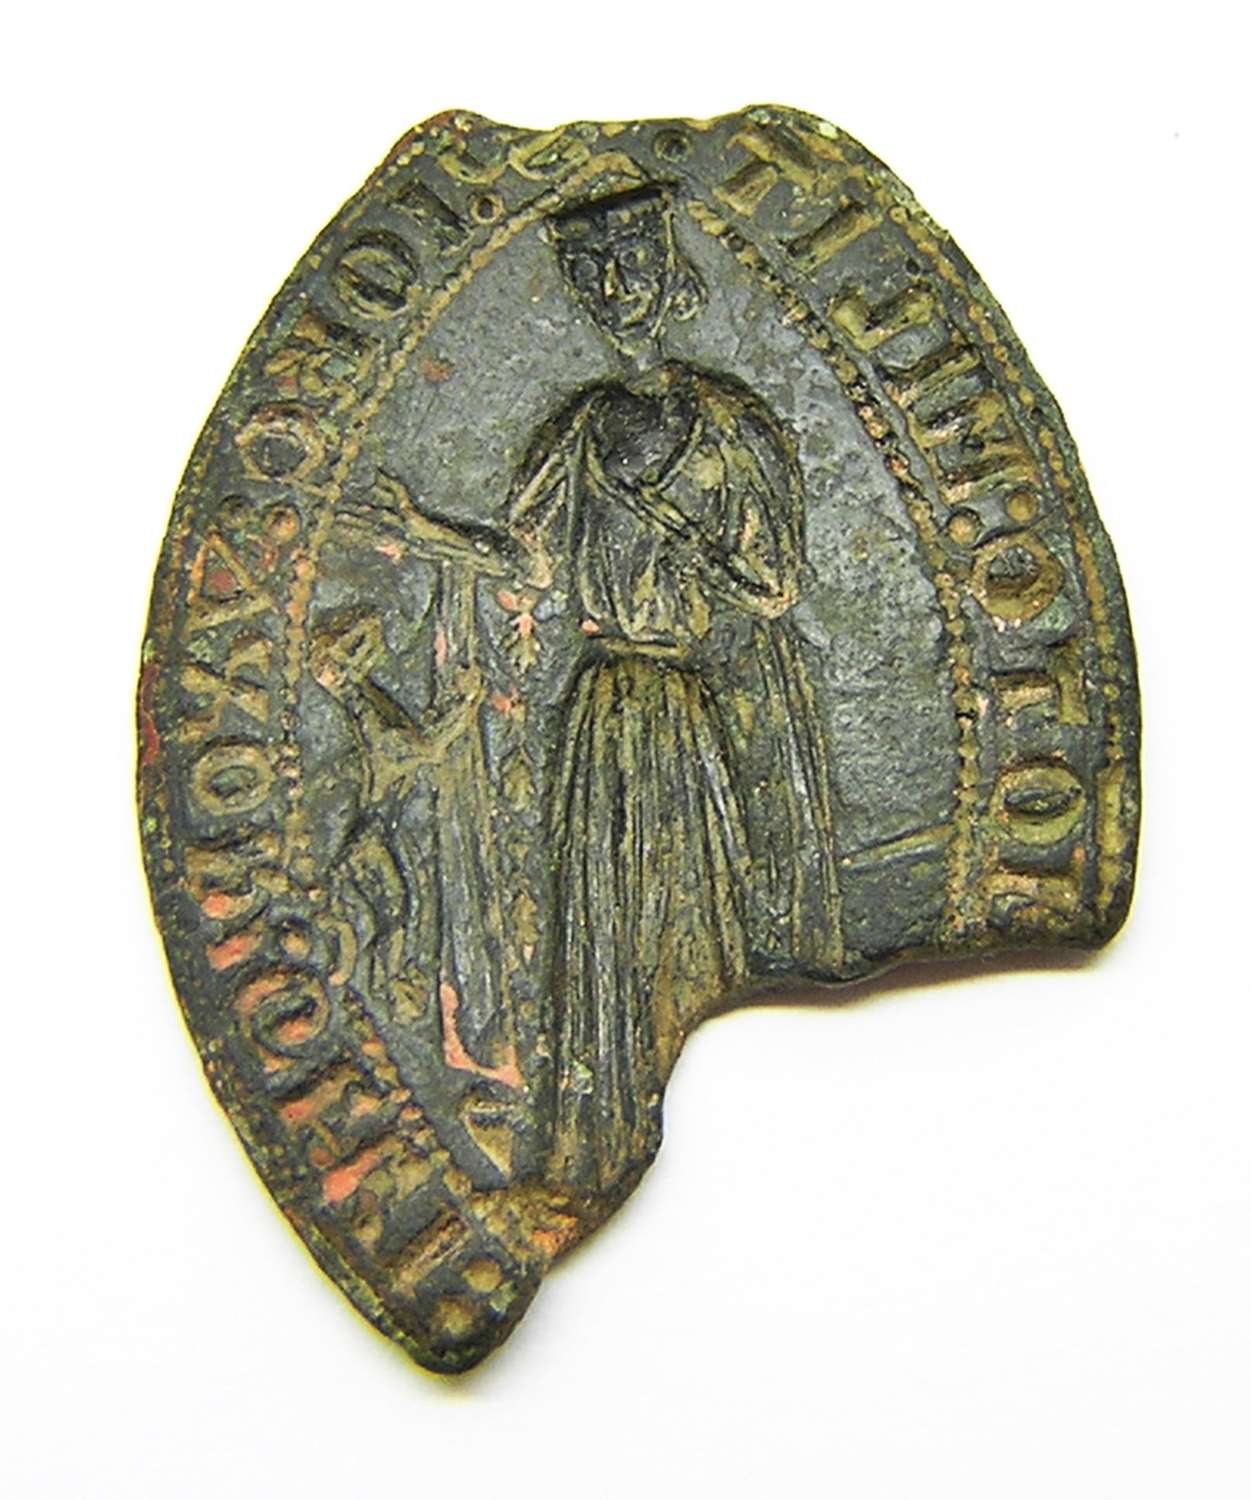 Medieval Lady Vessica Seal of the Wife of John the Knight